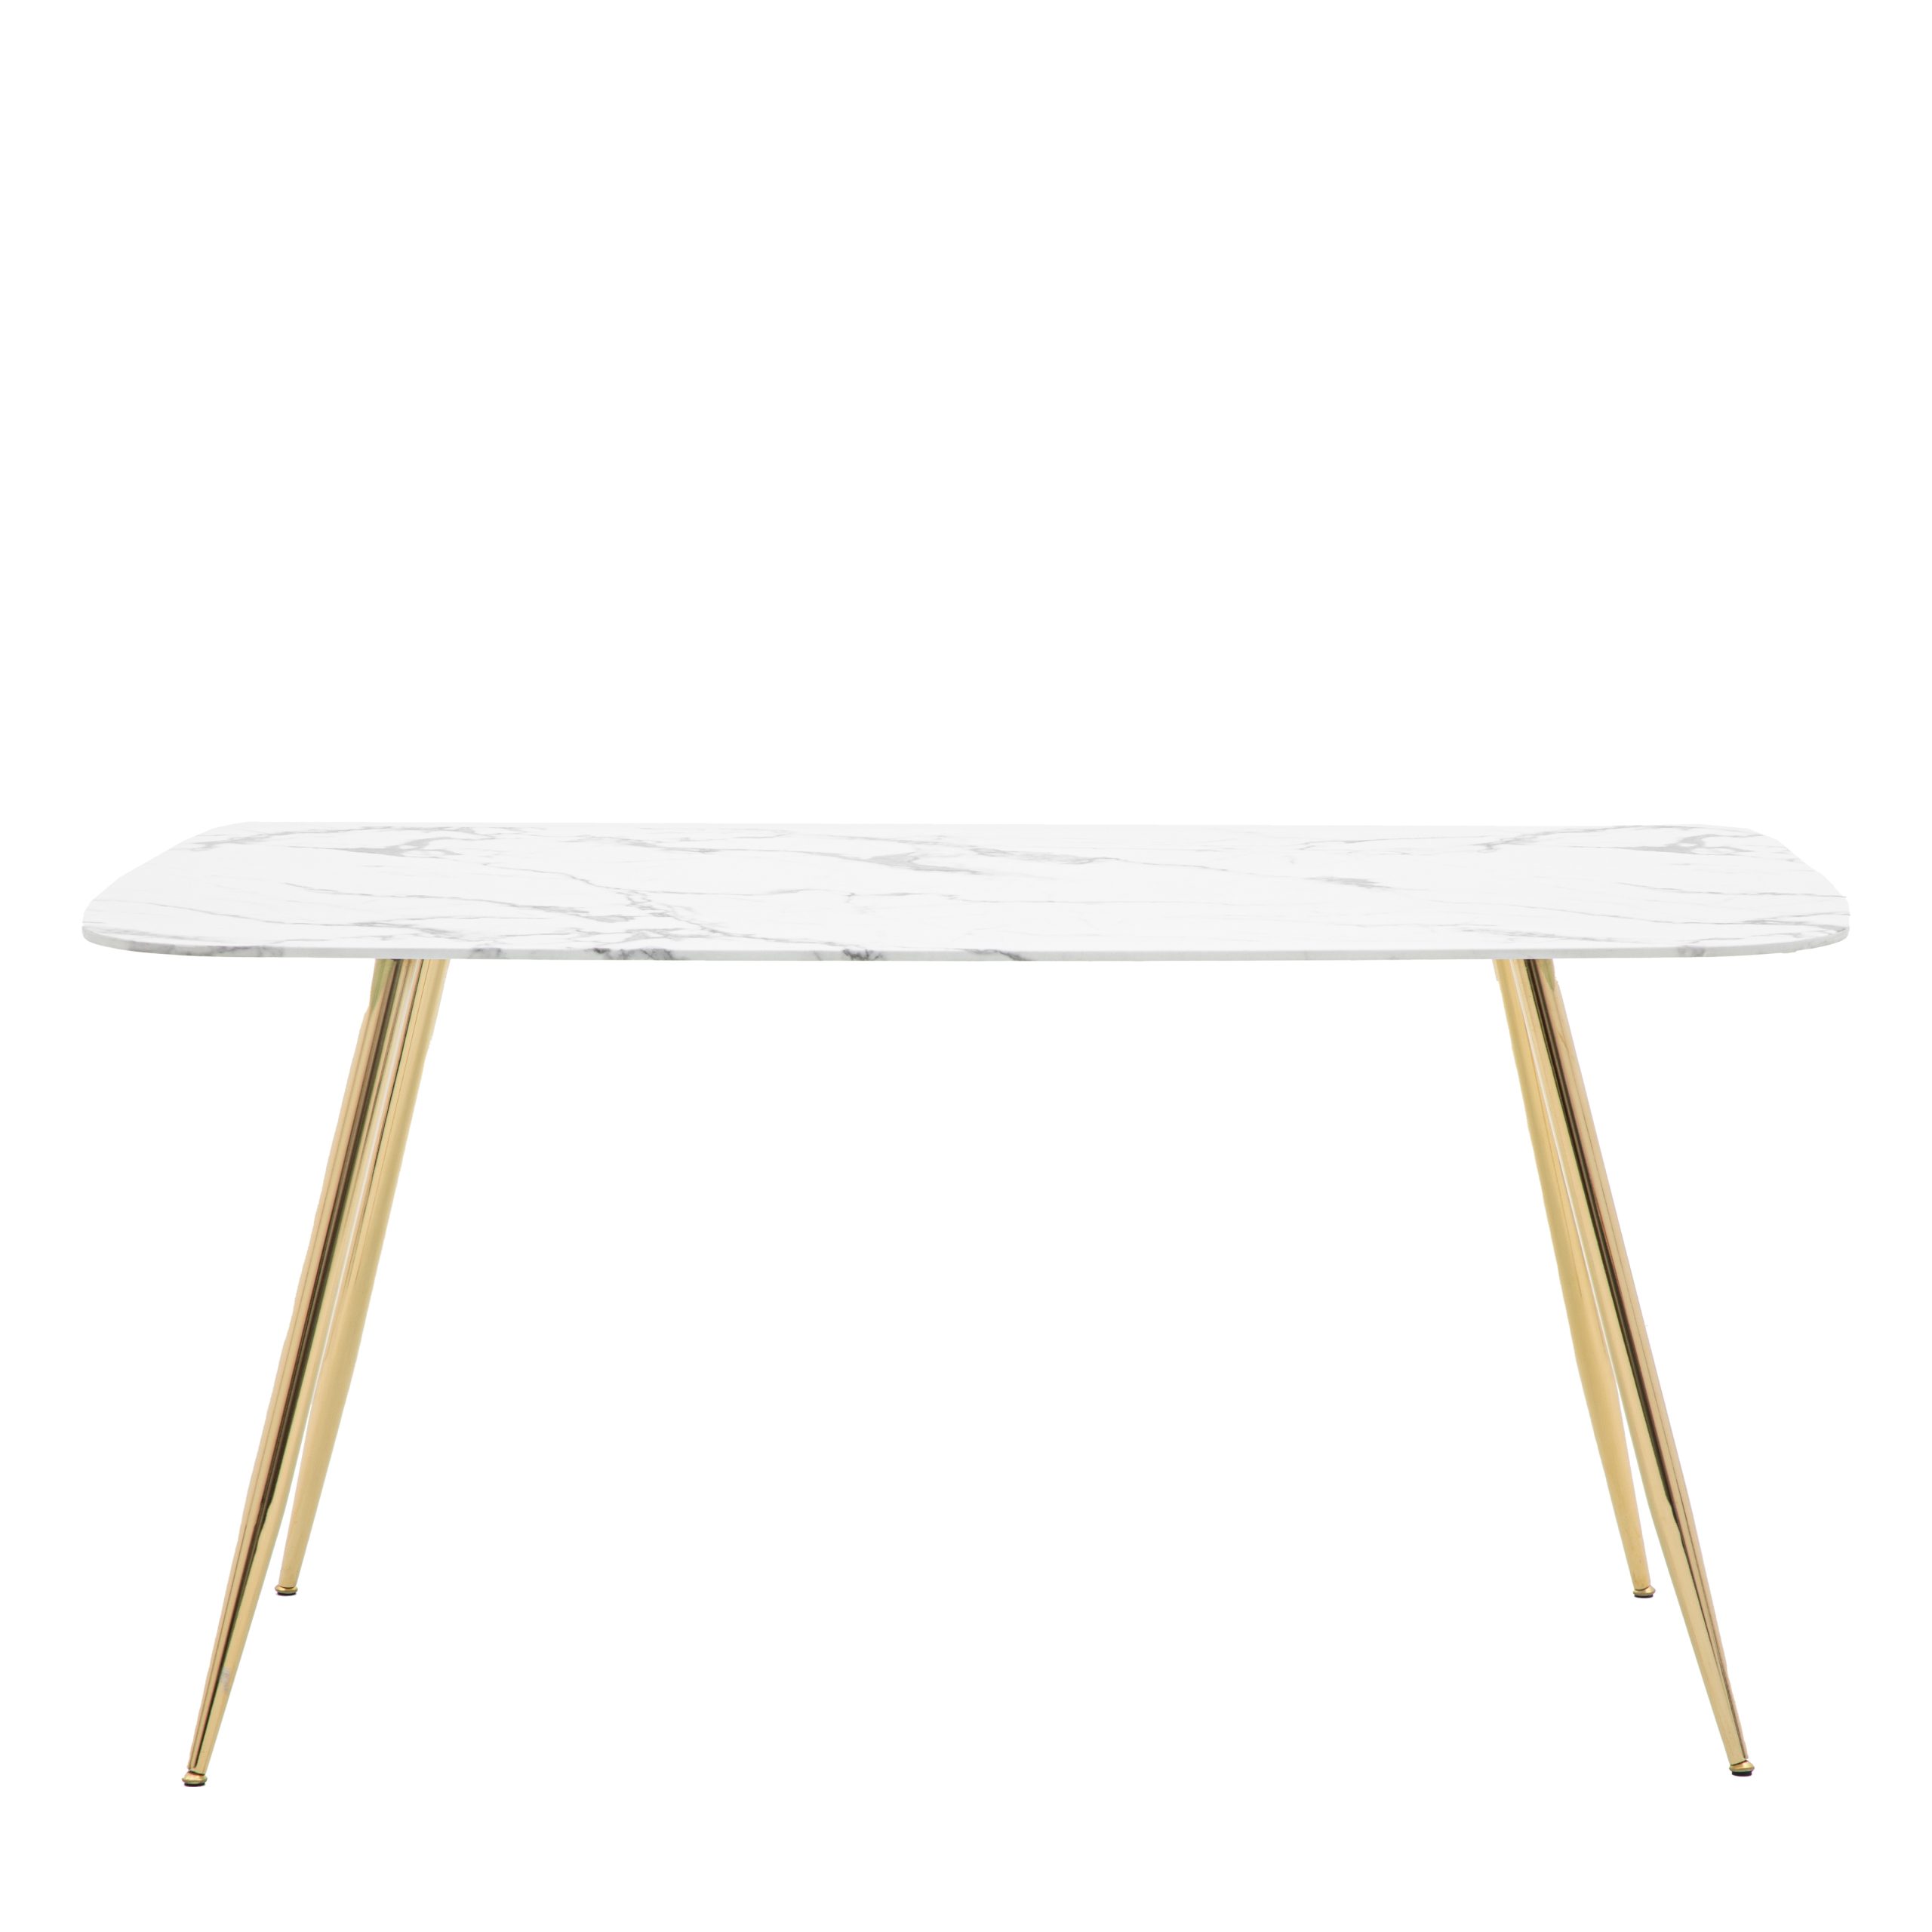 Gallery Direct Evans Dining Table White Effect